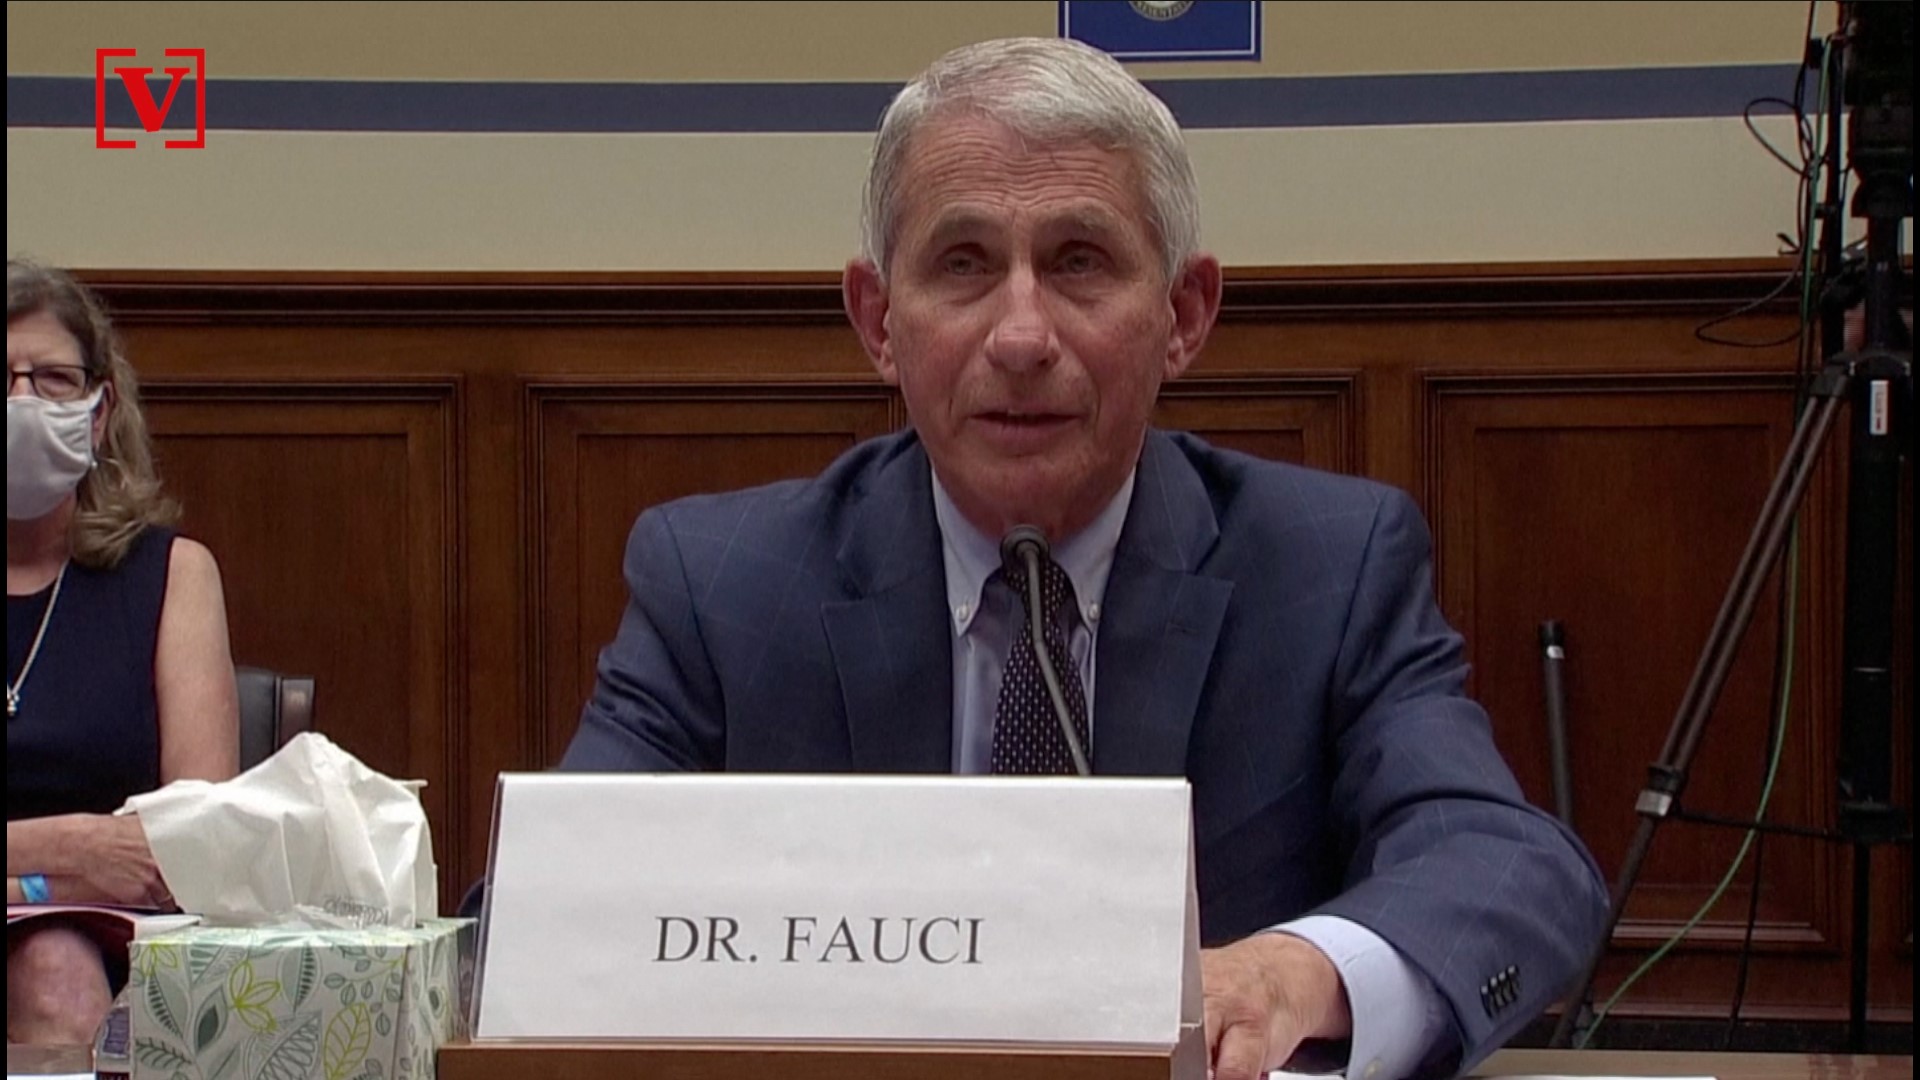 When it comes to developing a coronavirus vaccine by the end of 2020, Dr. Anthony Fauci testifies that he is 'cautiously optimistic.' Veuer's Justin Kircher has more.